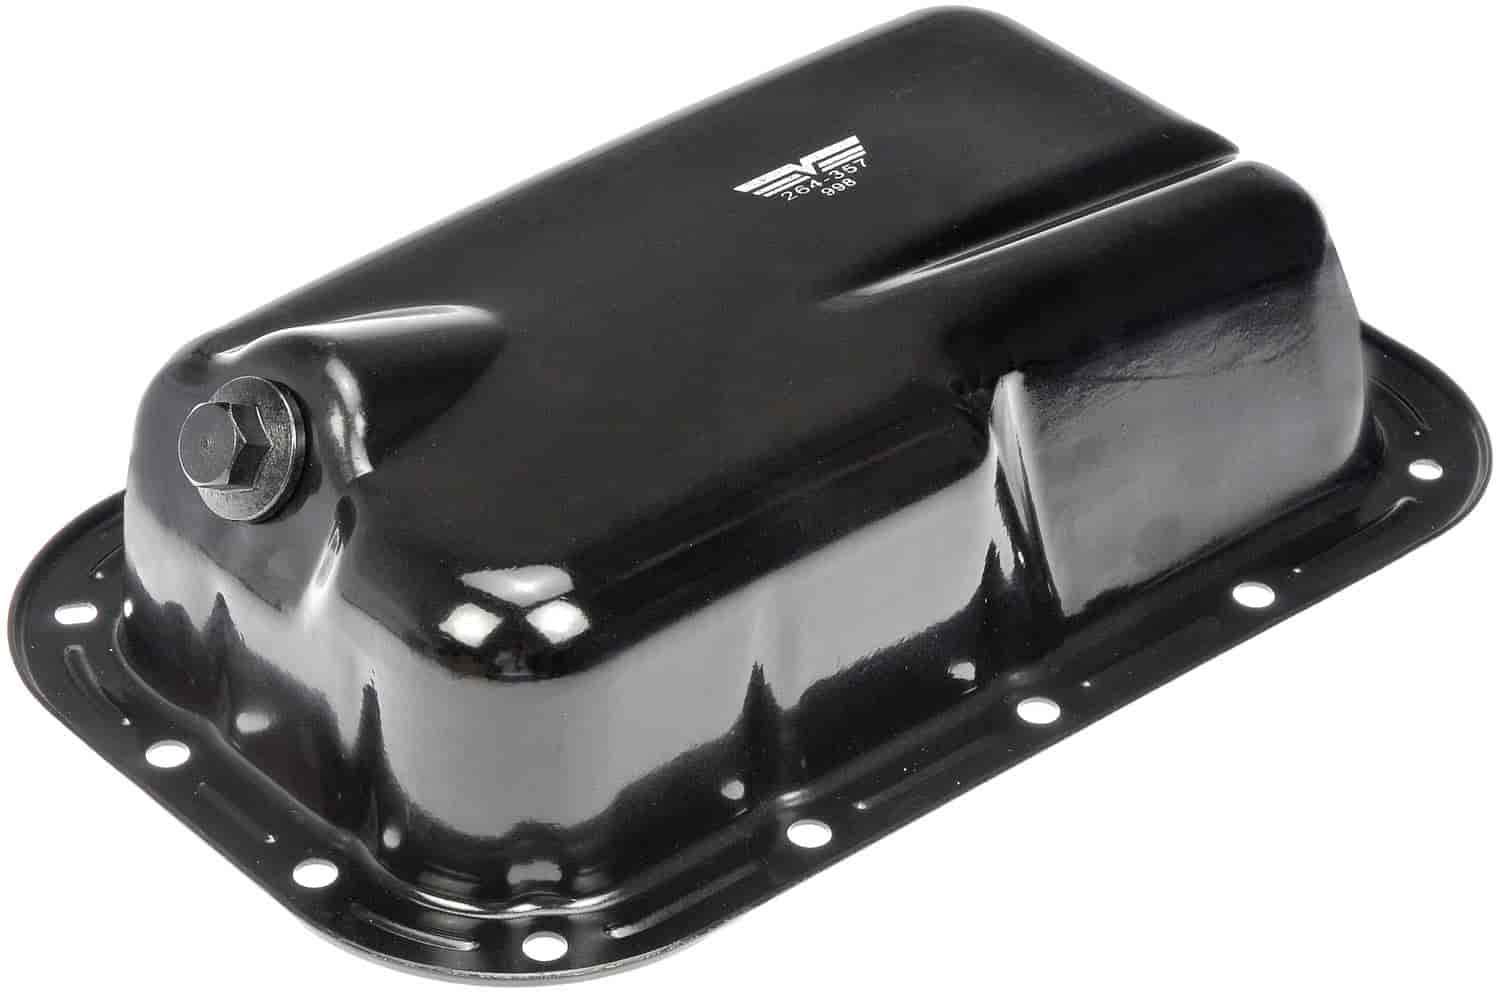 Stock Replacement Oil Pan 2011-2019 Chrysler, 2011-2019 Dodge, 2012-2019 Jeep - 3.6L V6